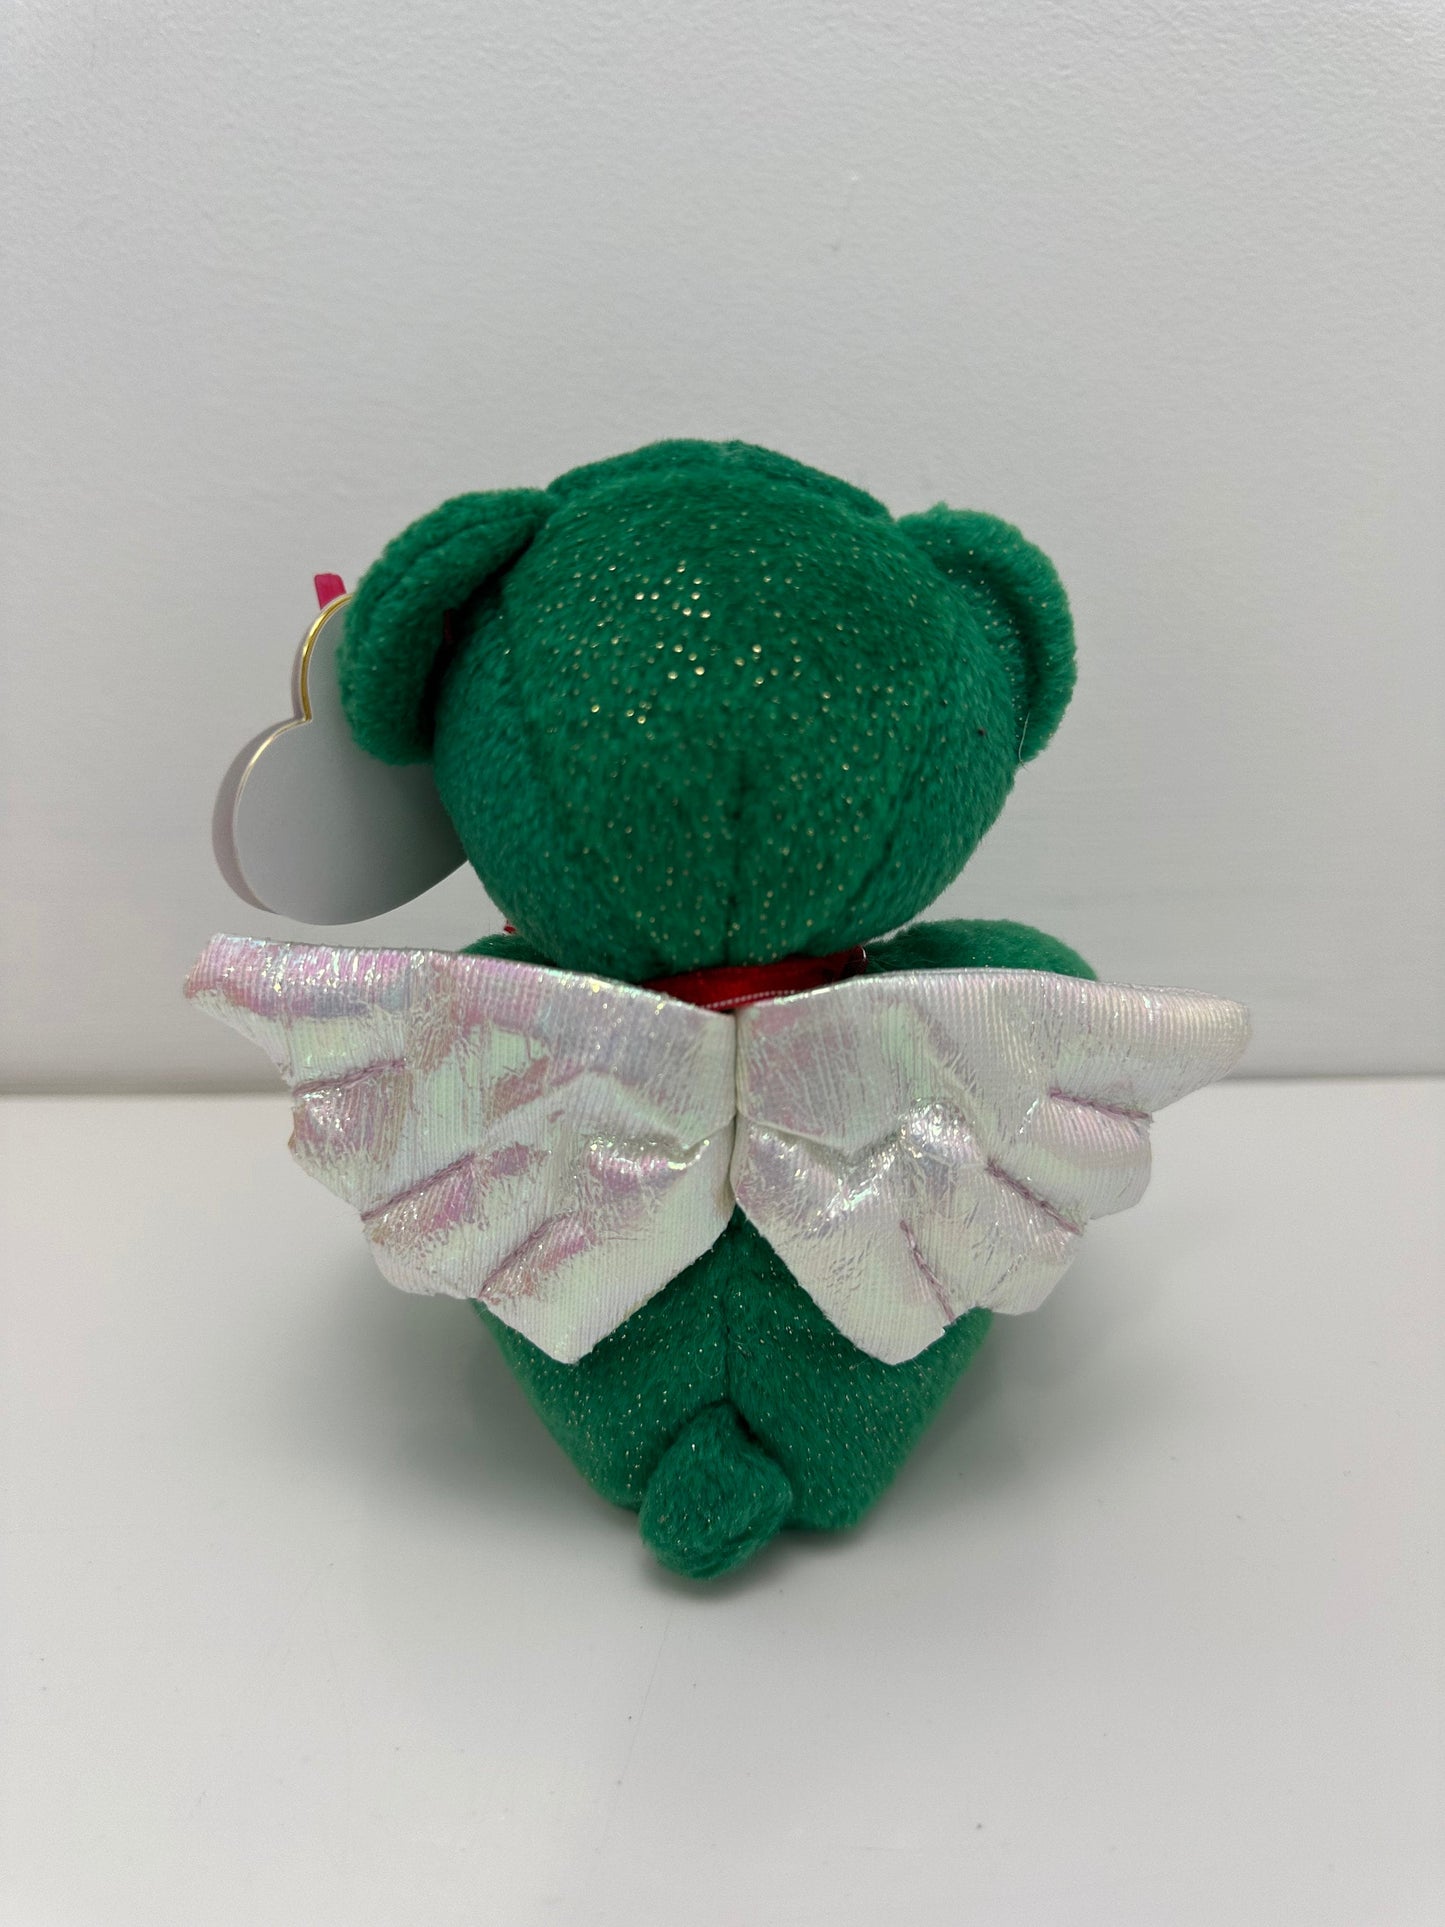 Ty Beanie Baby “Hark” the Angel Bear with iridescent wings - Green Version (6 inch)